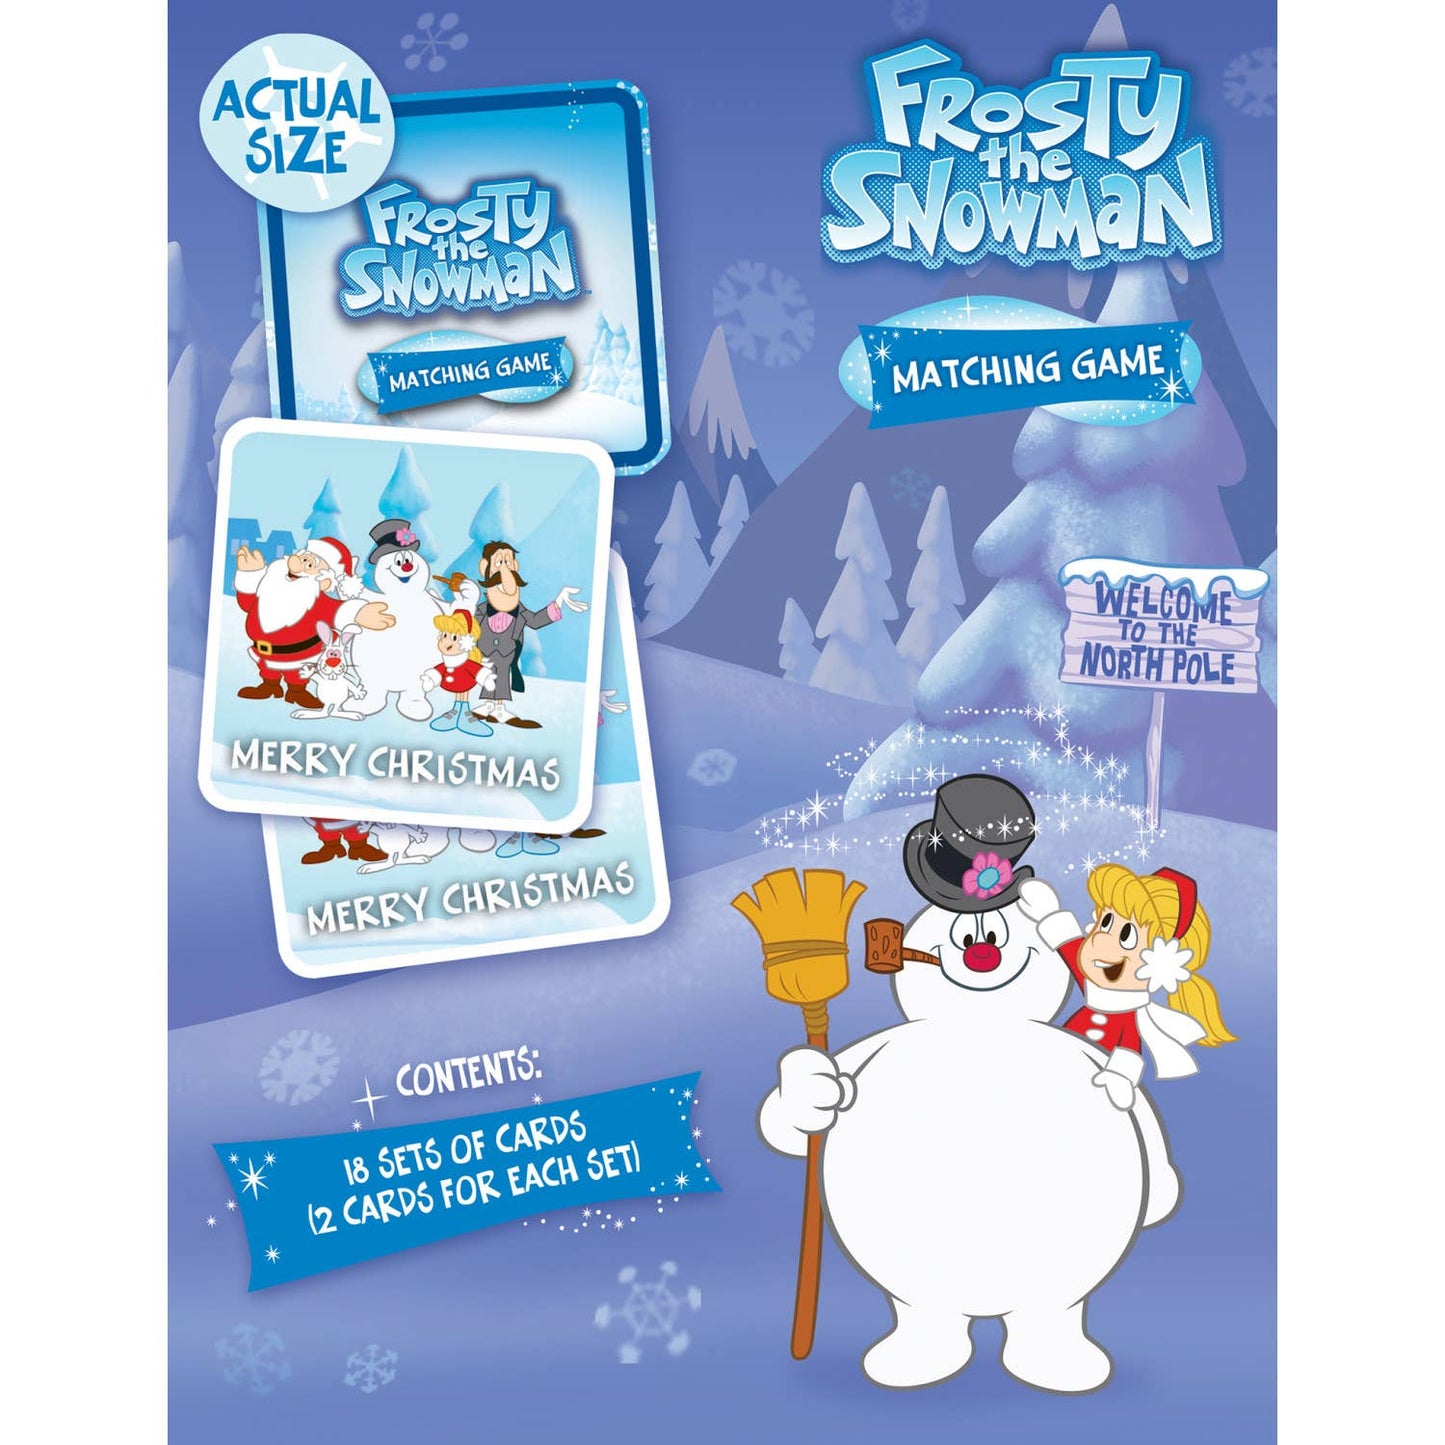 Frosty the Snowman Matching Game